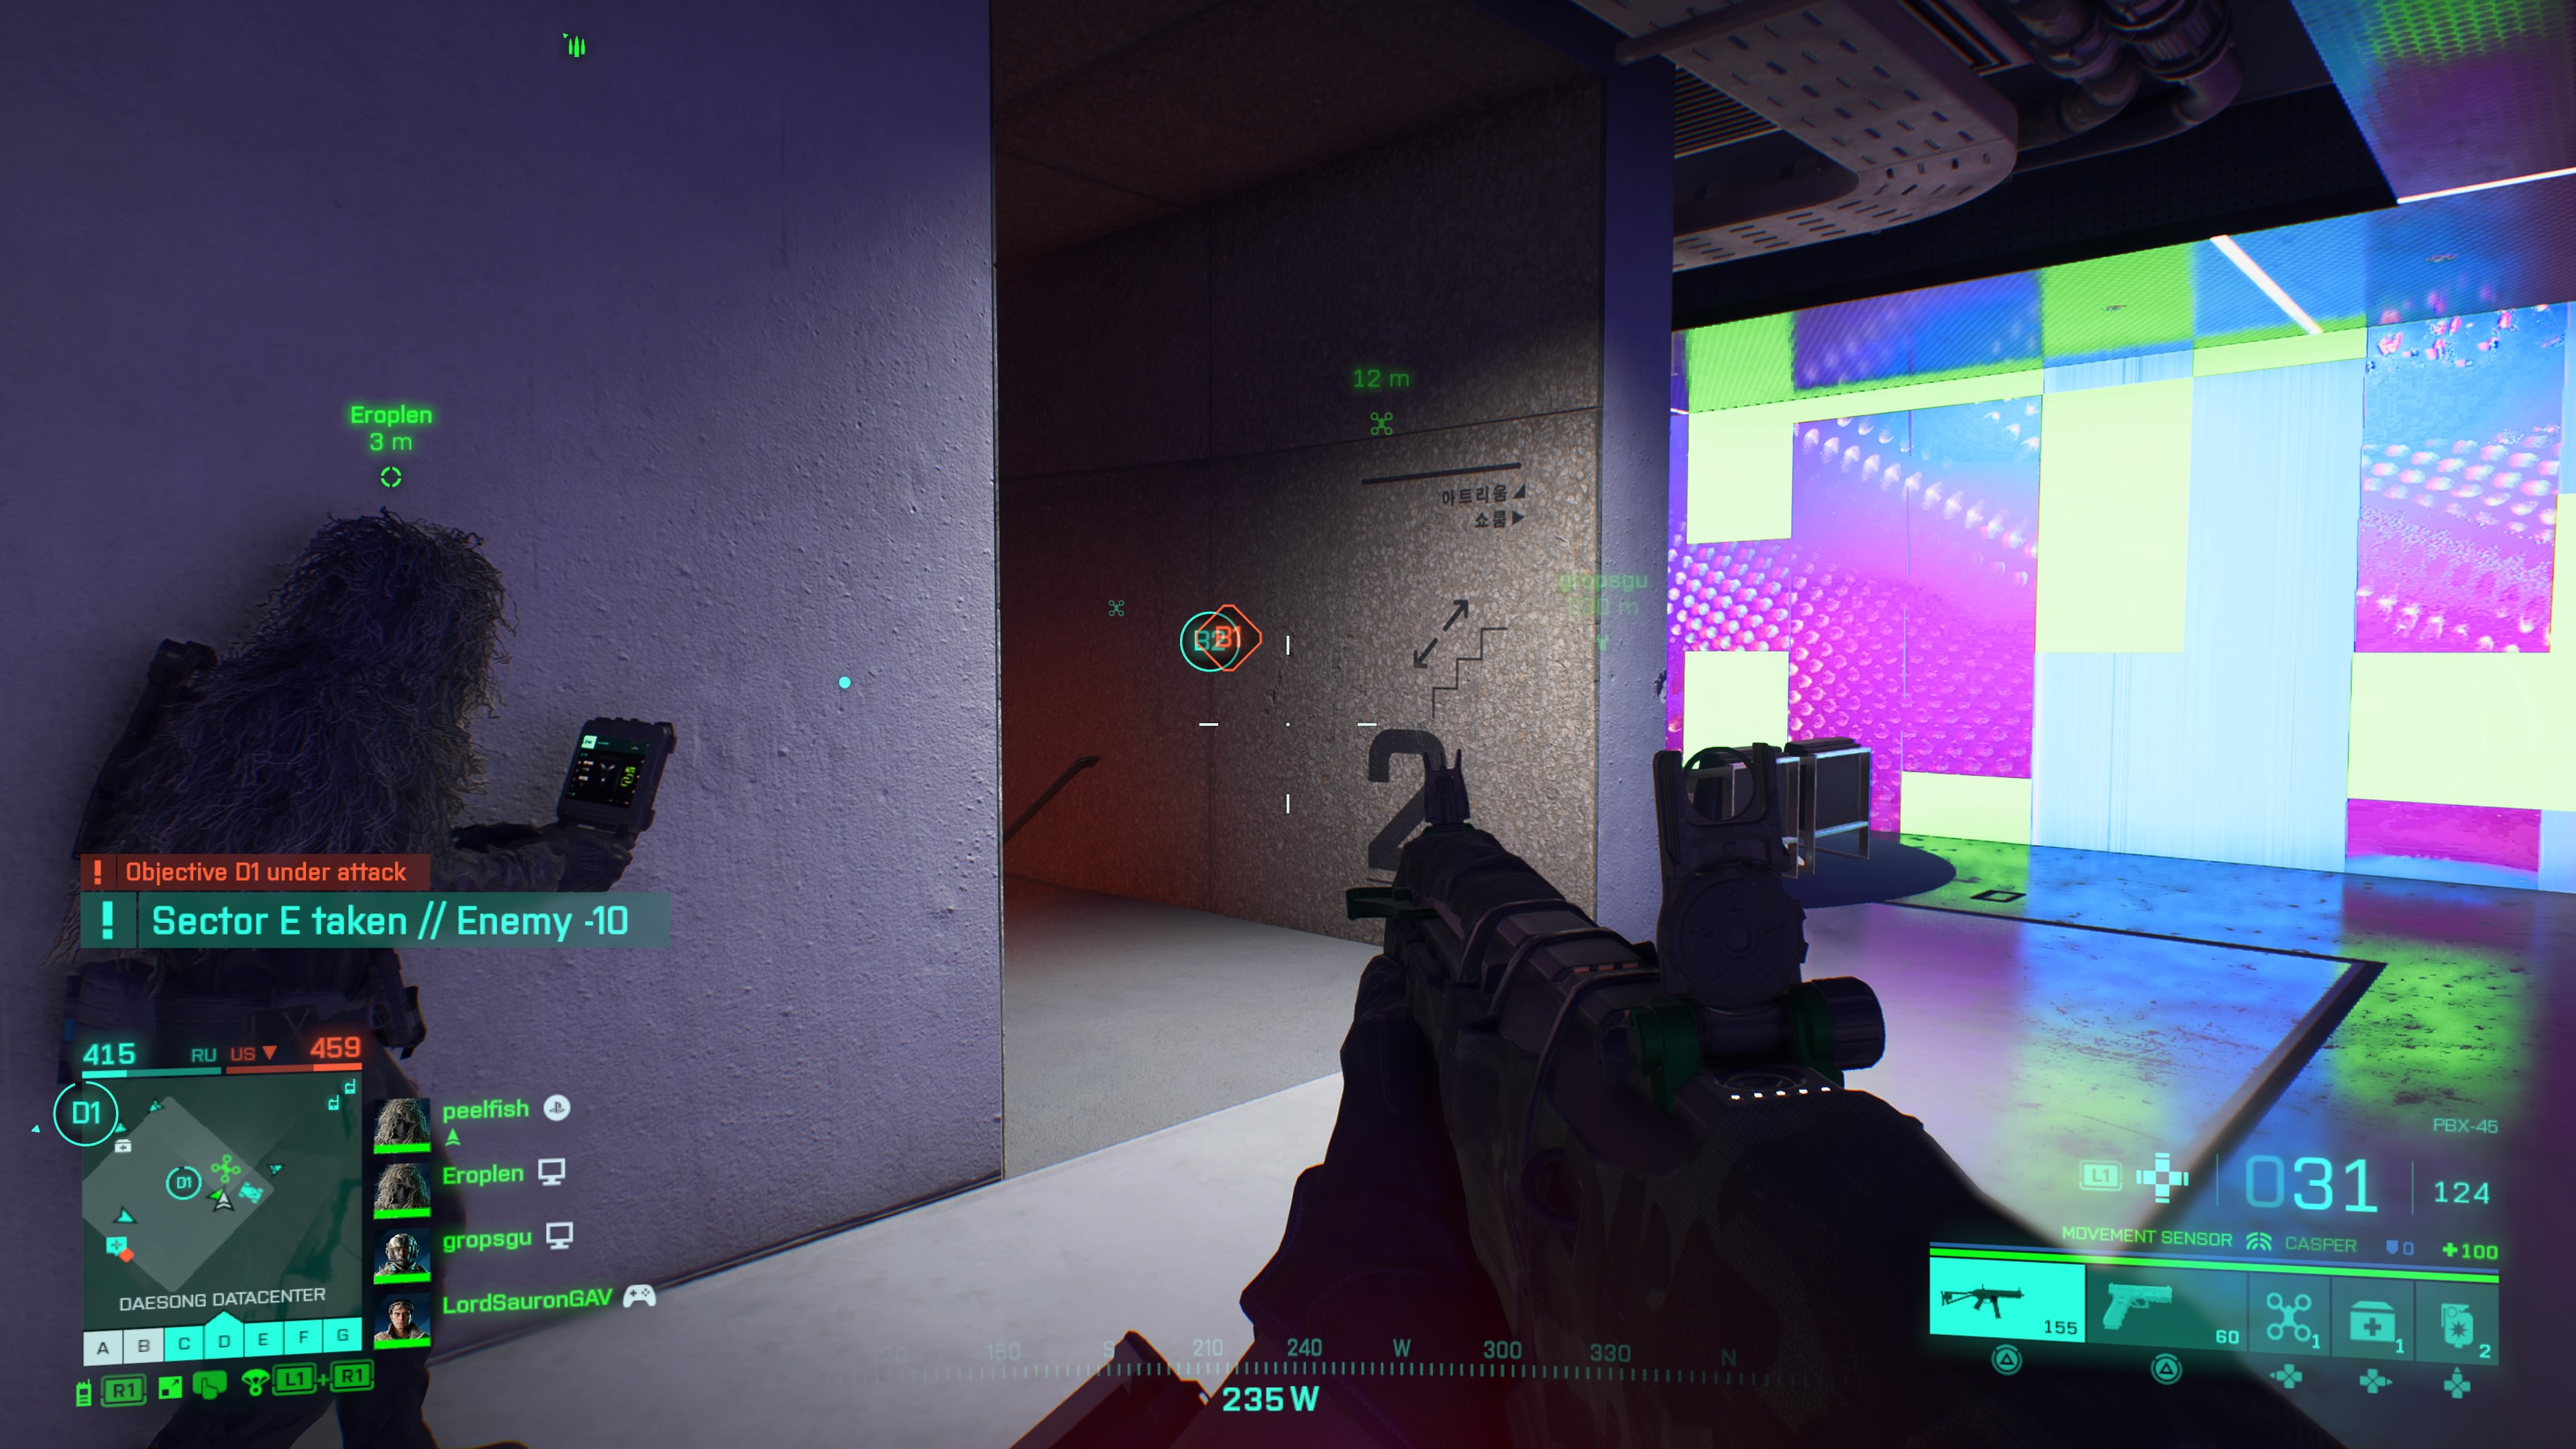 State of the Game Battlefield 2042 - sneaking through corridors with large distorted screens lighting the way